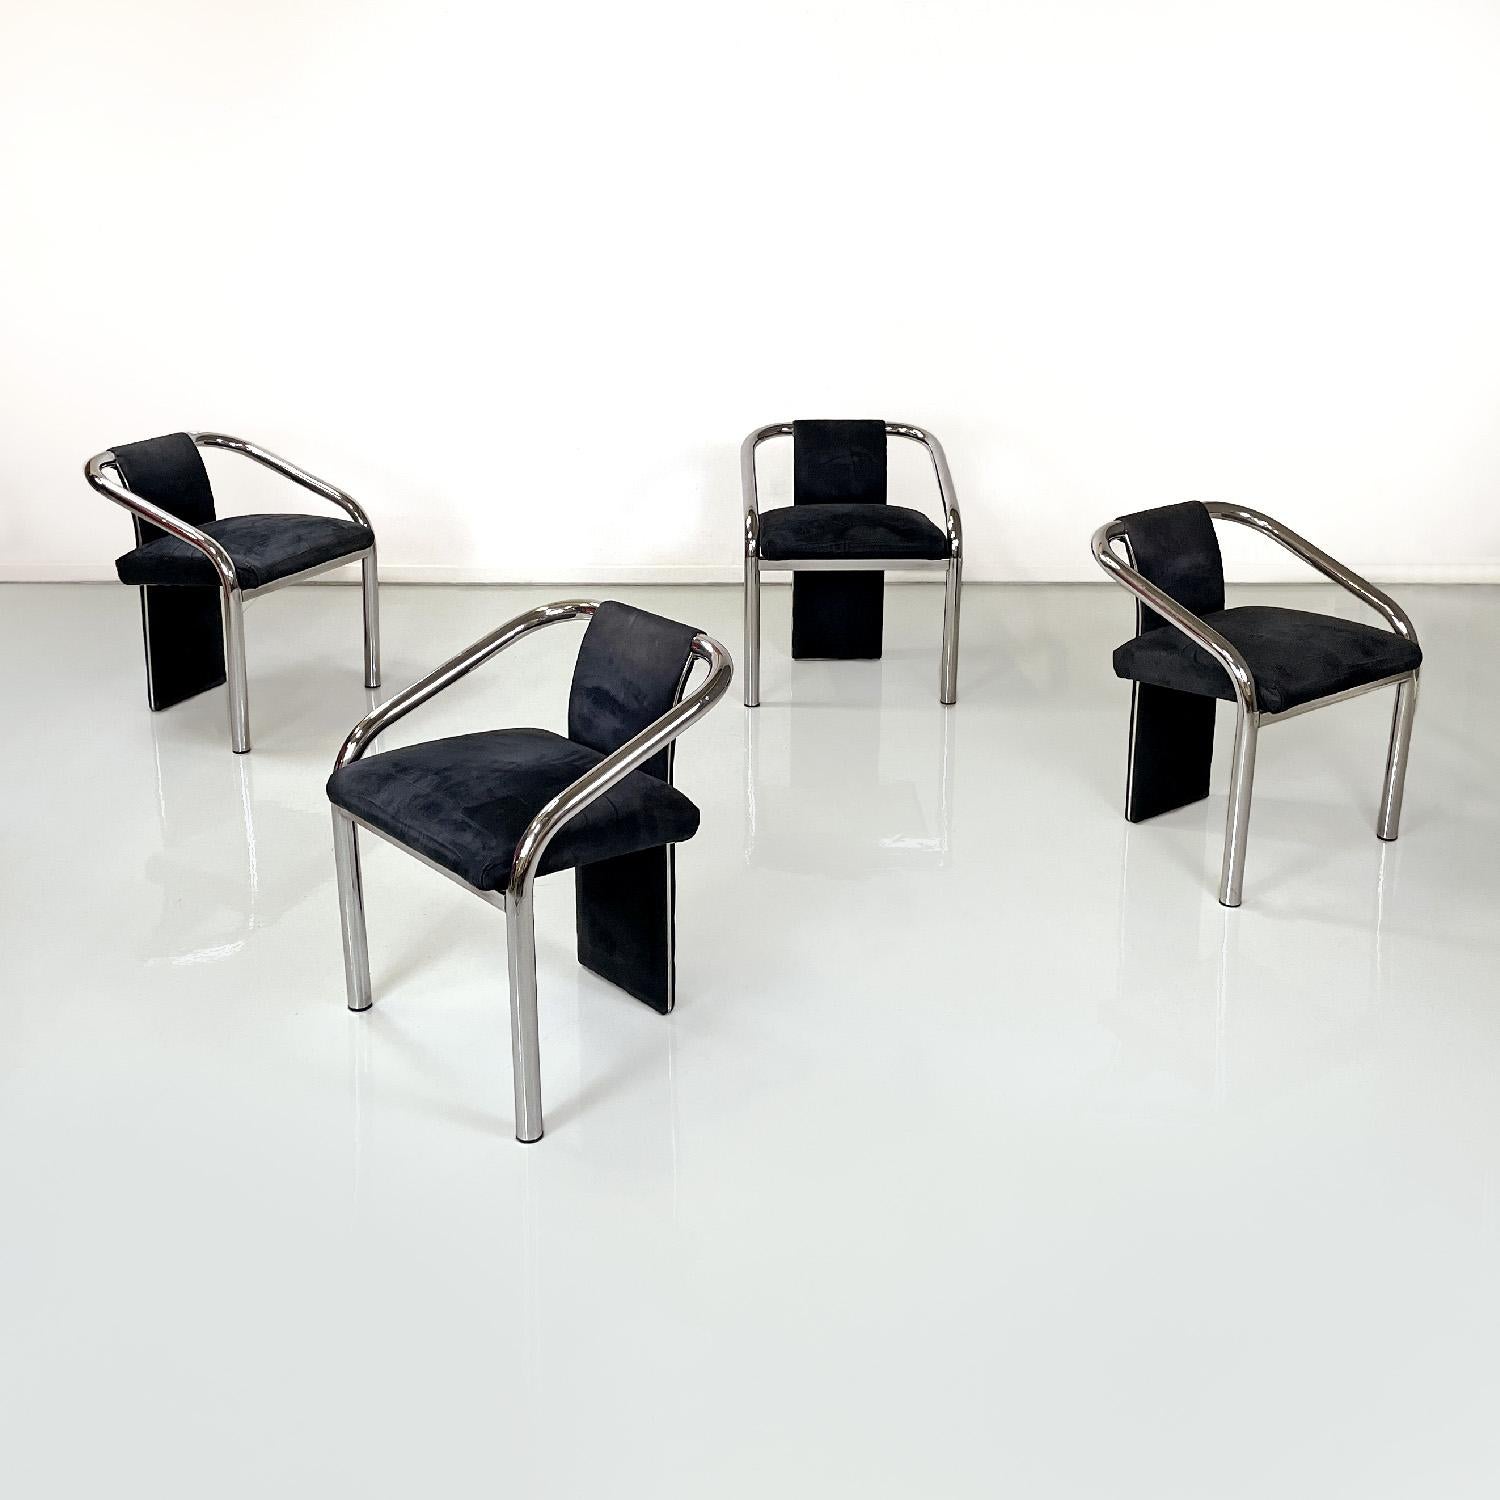 Italian modern dark blue velvet and chromed metal chairs, 1980s
Set of four chairs with rectangular seat. The backrest extends to the floor, and is covered in deep dark blue velvet like the seat. The structure is made of chromed tubular steel,